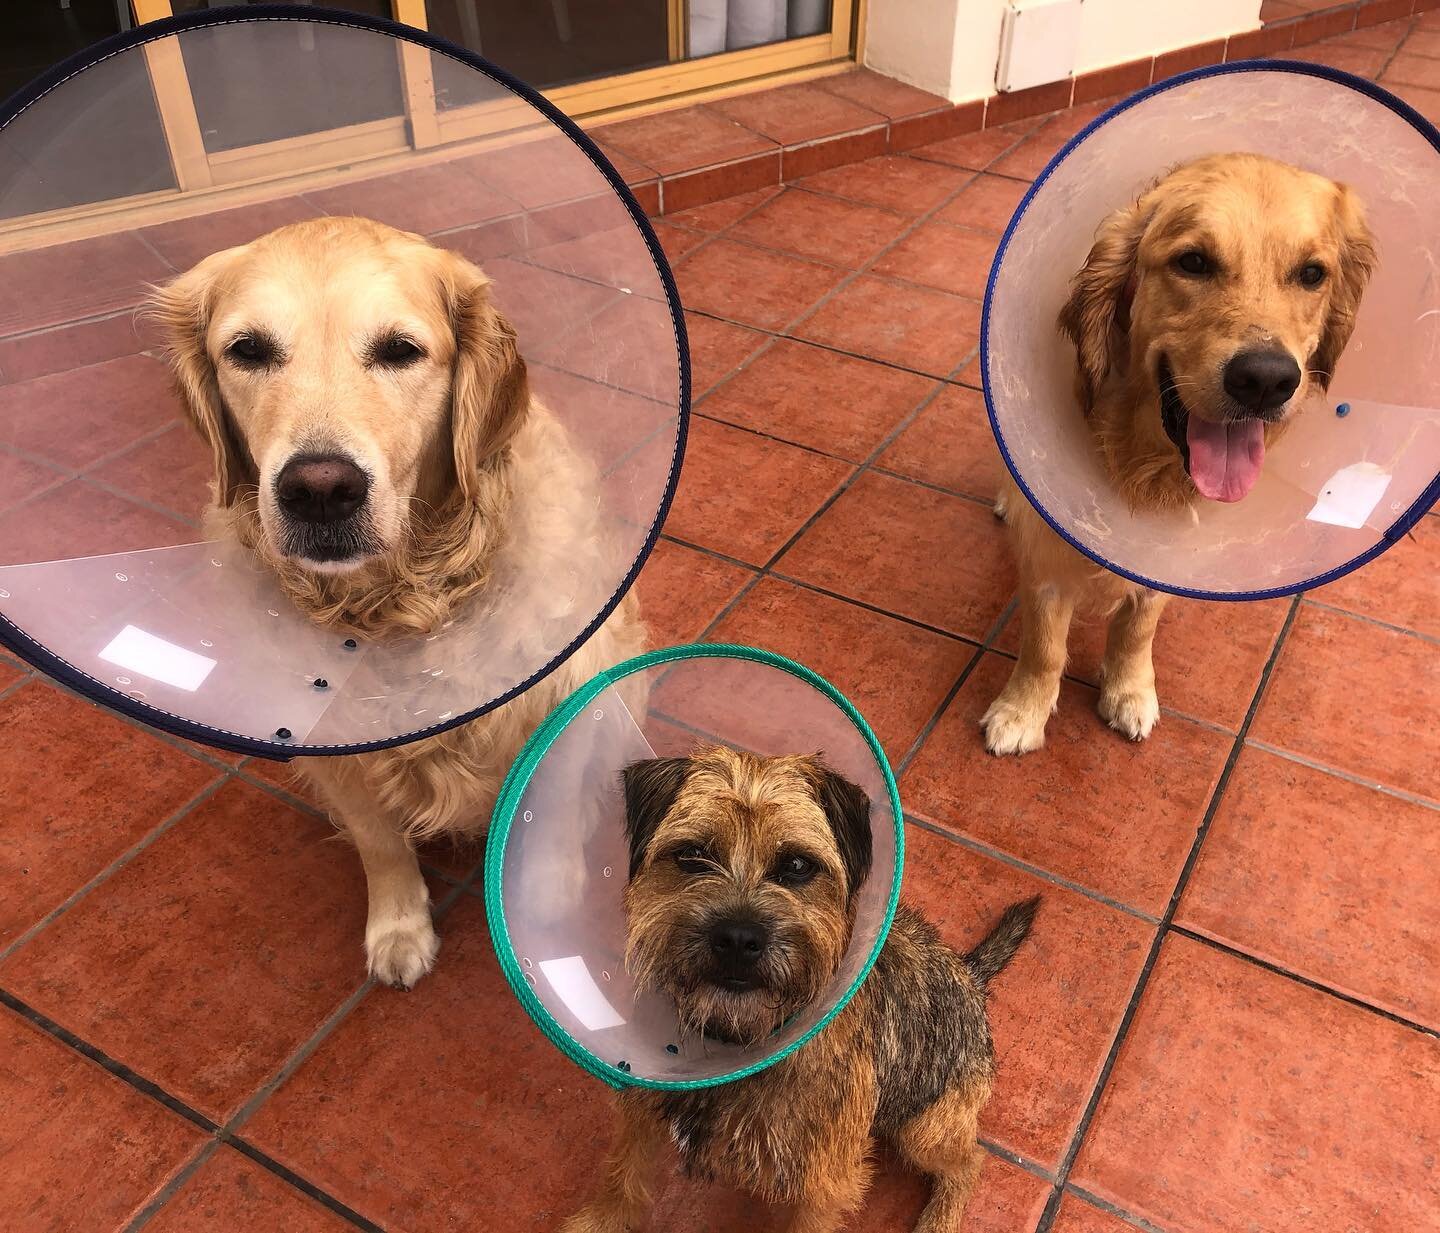 Whats the only thing worse than needing to wear the plastic cone of shame after getting stitches at the vet? Needing to wear a cone after your brother gets stitches at the vet 😂😂 #coneofshame #luckydogs #lifewithdogs #goldenretriever #borderterrier